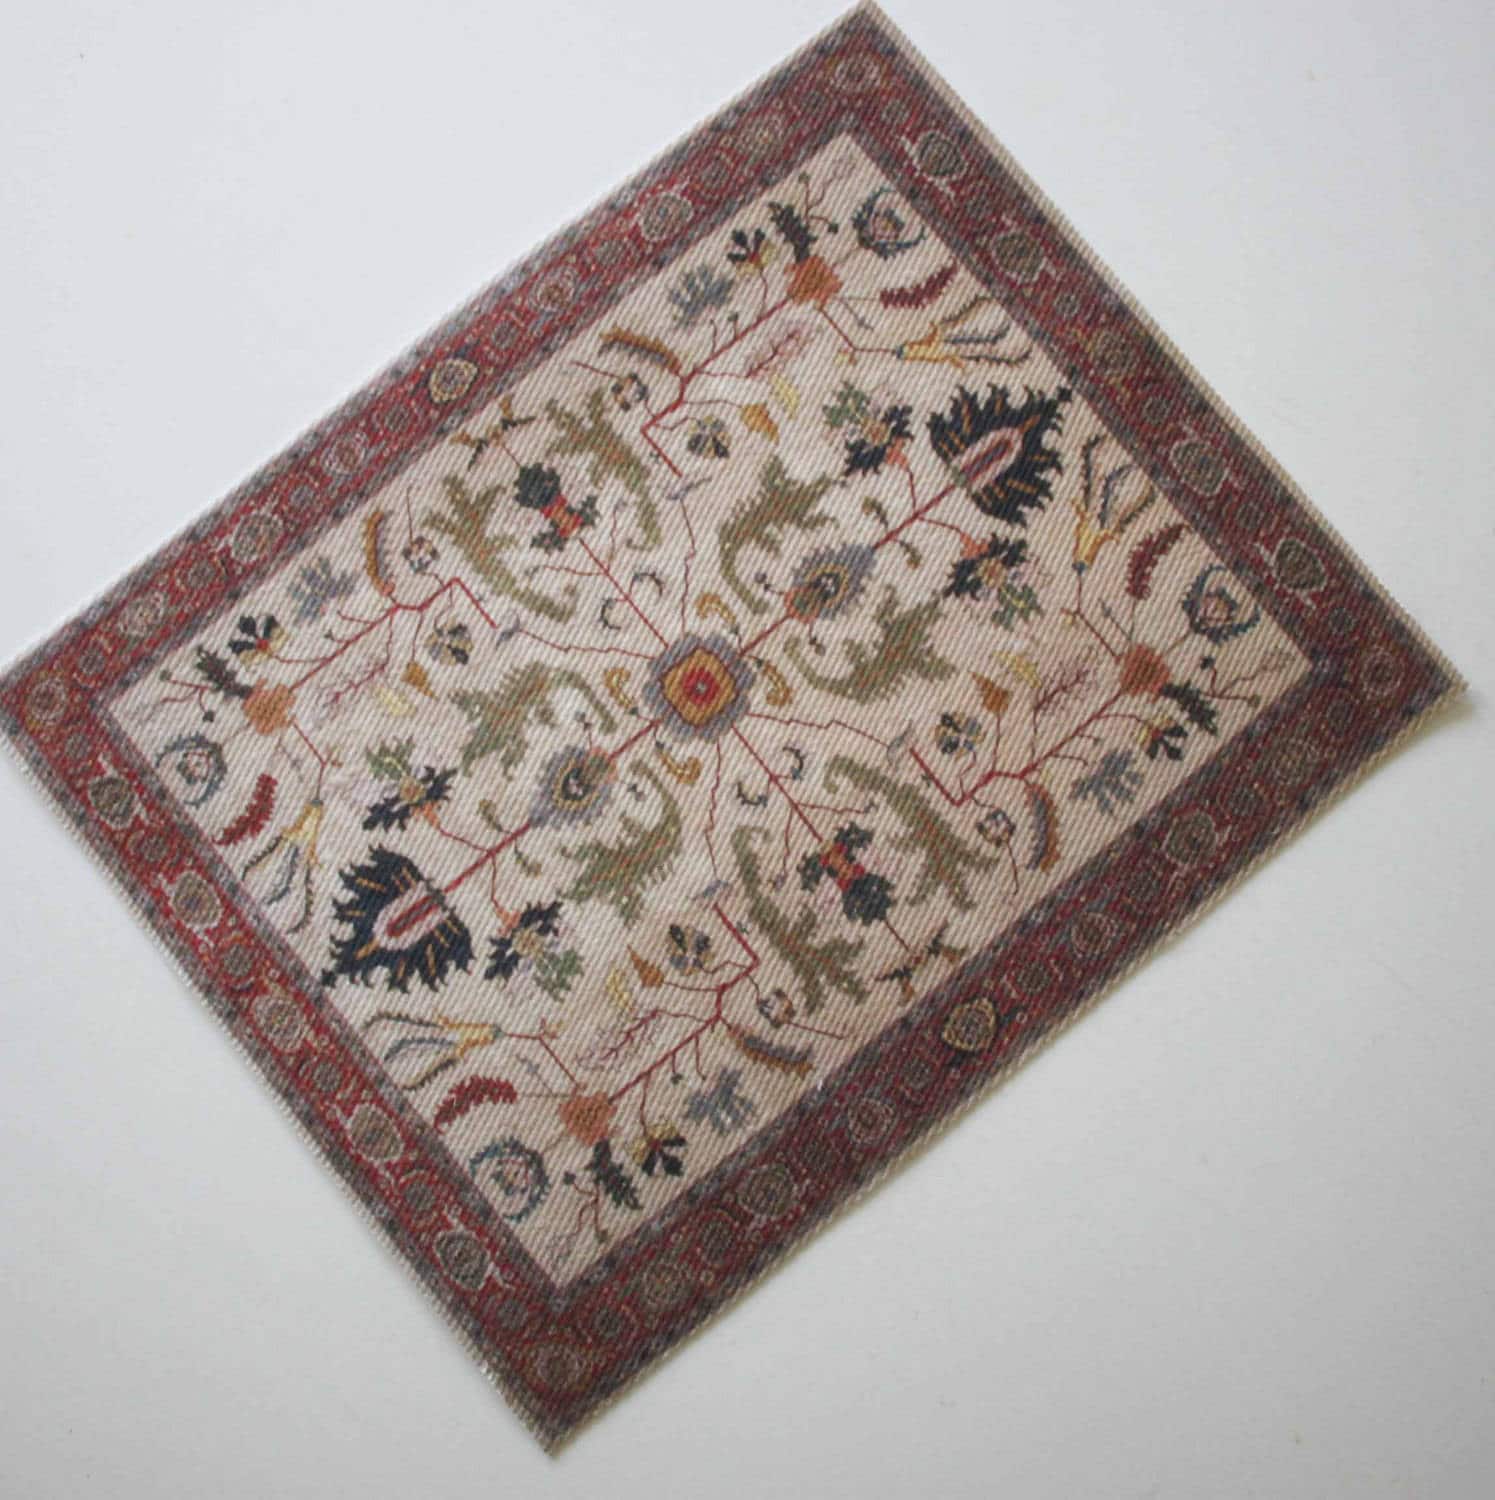 0002032 1:144 Scale Dollhouse Sheet of Area Rugs 